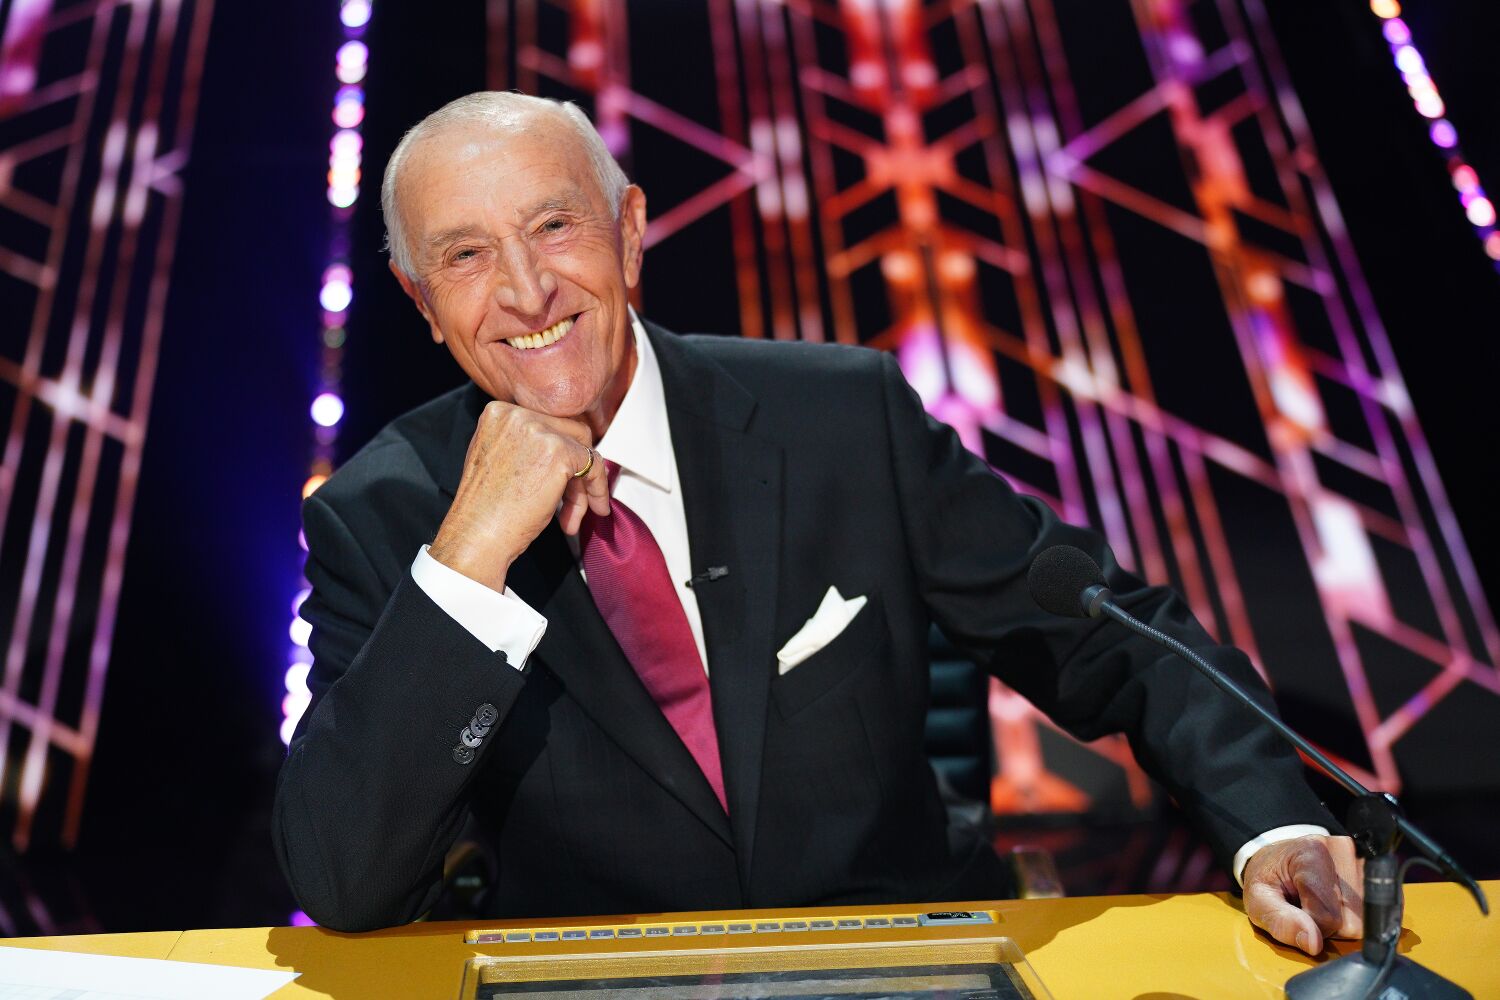 Len Goodman is retiring from 'Dancing With the Stars' to spend time with family